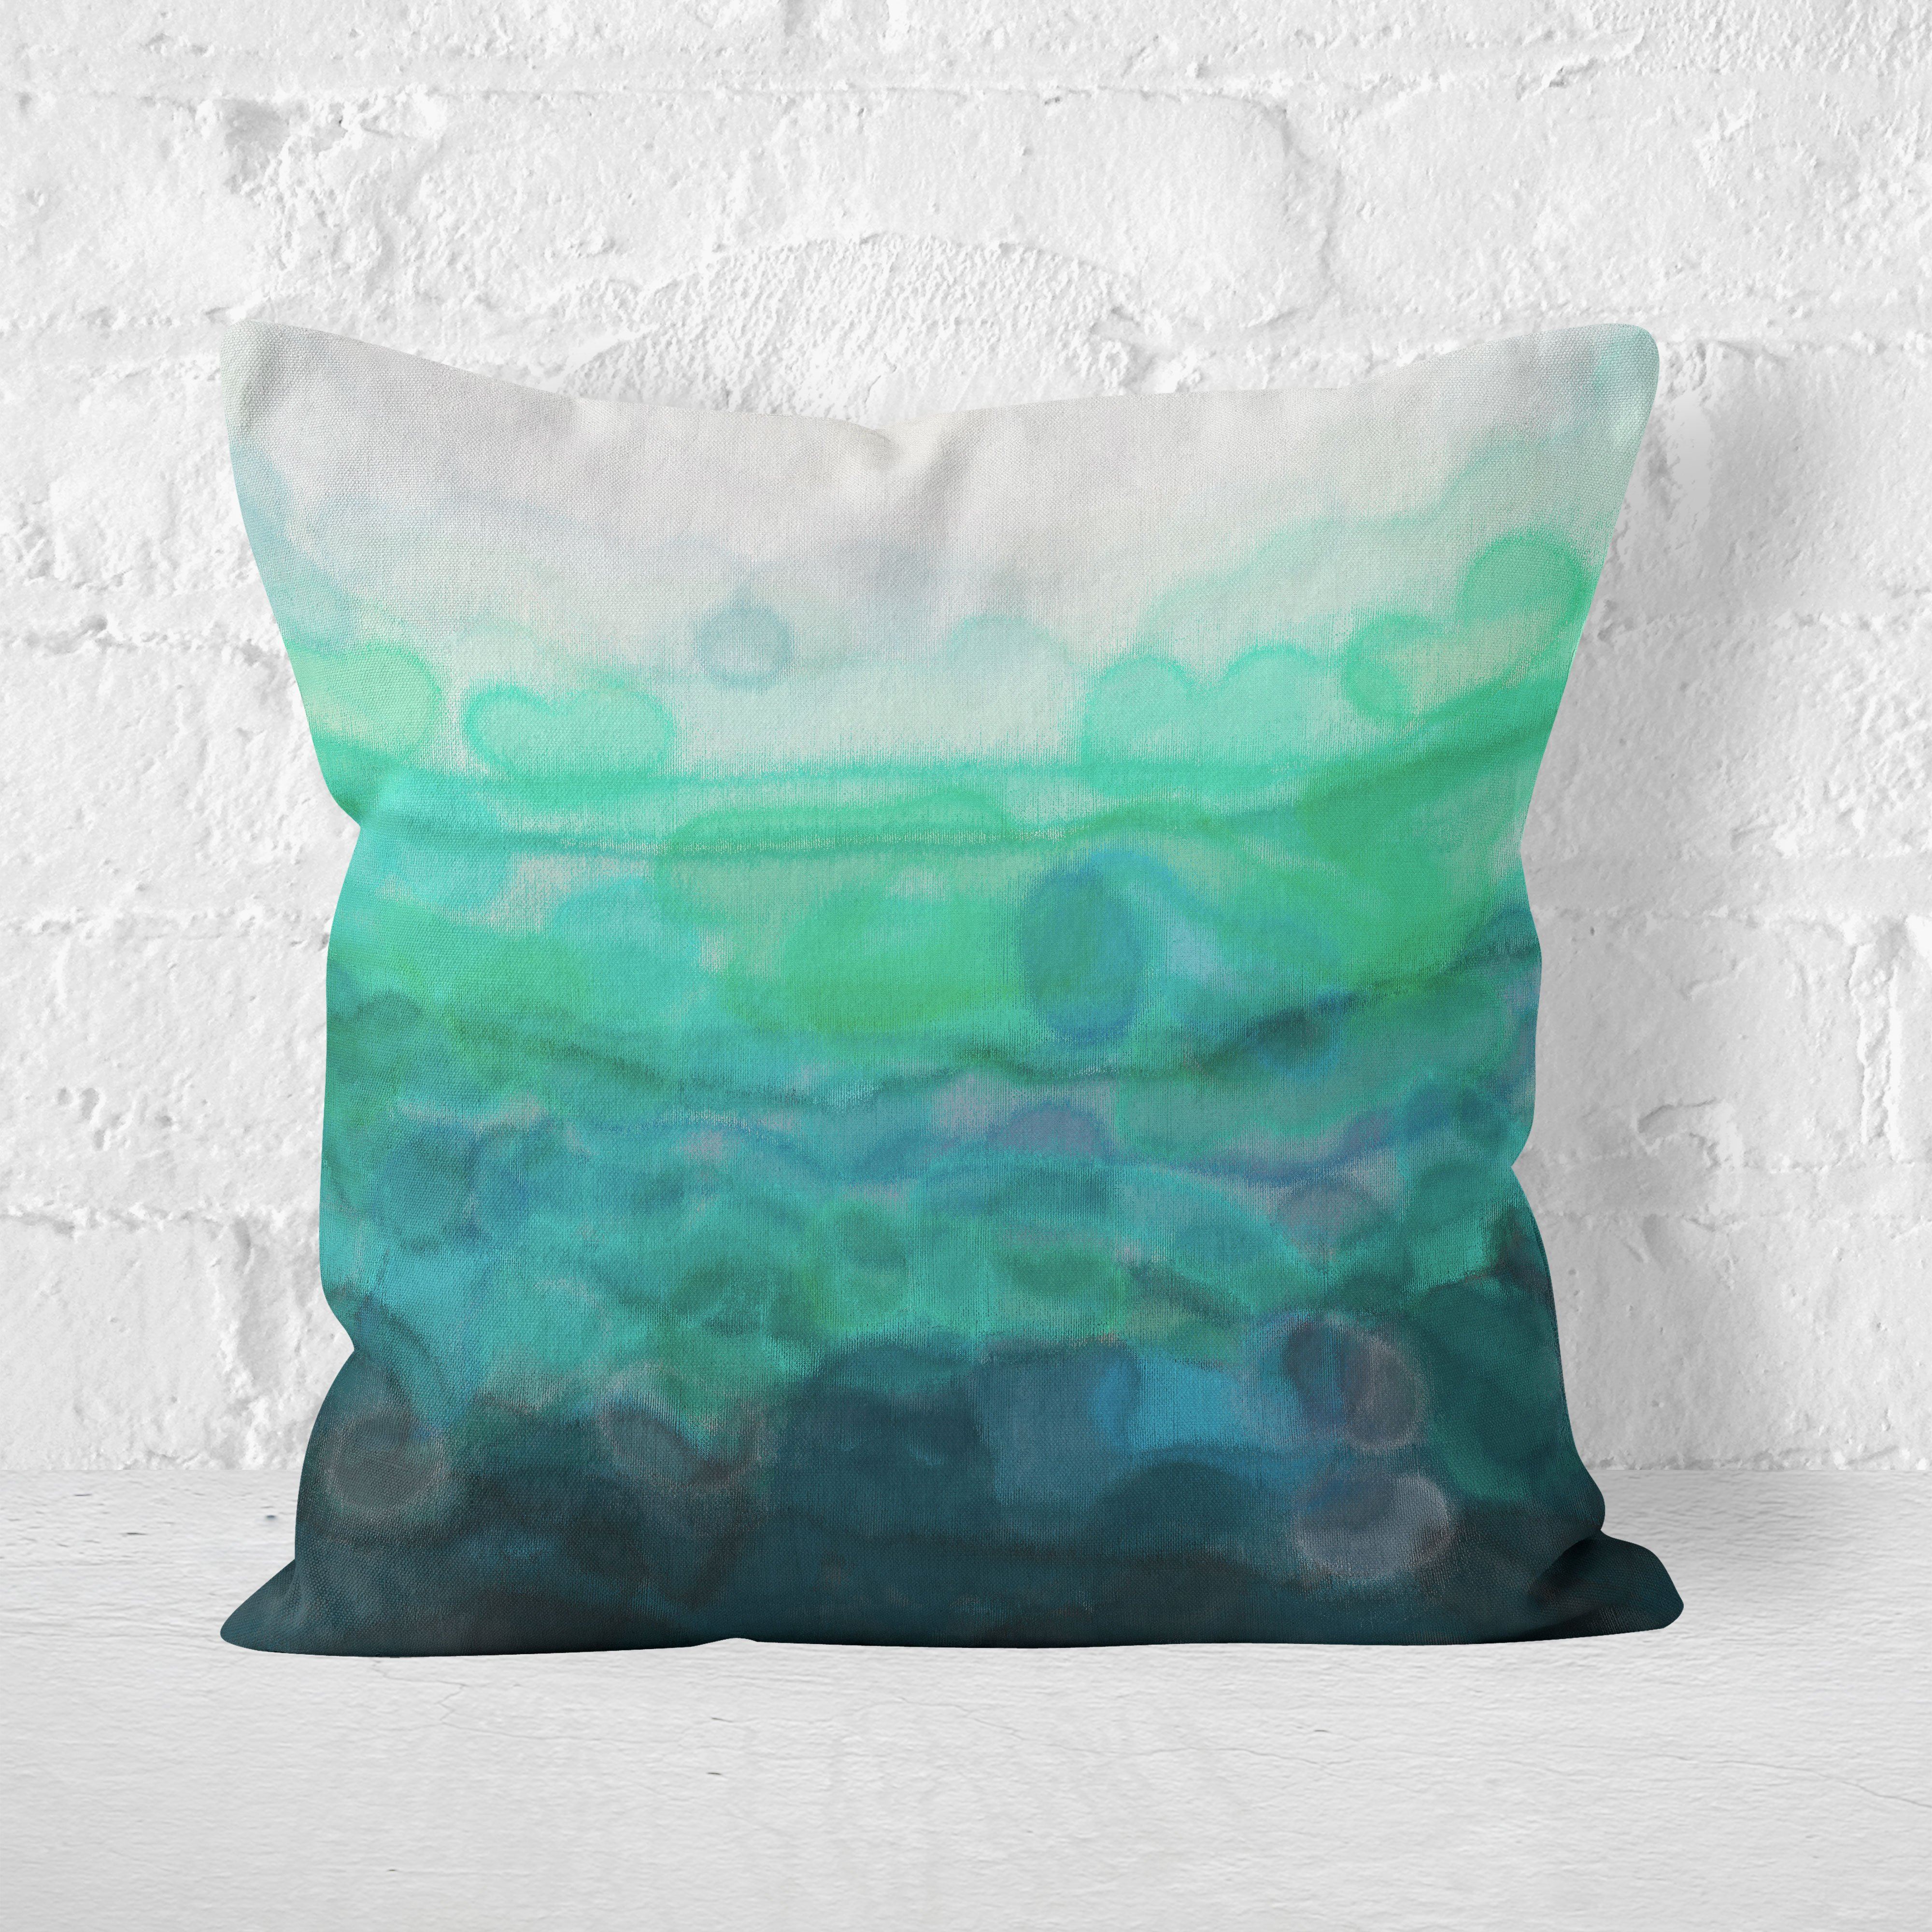 Teal 'Serenity' Cushion - Louise Mead